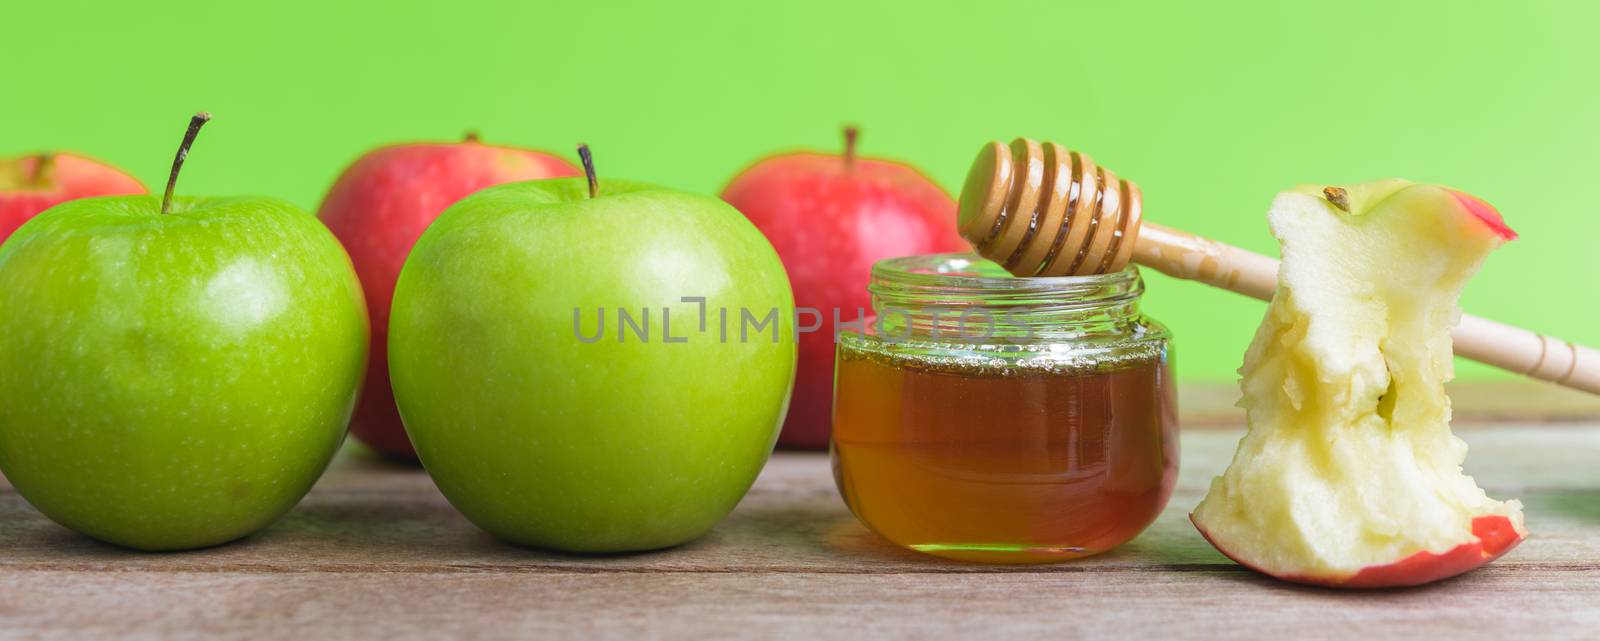 Jewish holiday, Apple Rosh Hashanah dessert, on the photo have honey in jar have red apples and green apples on wooden with green background